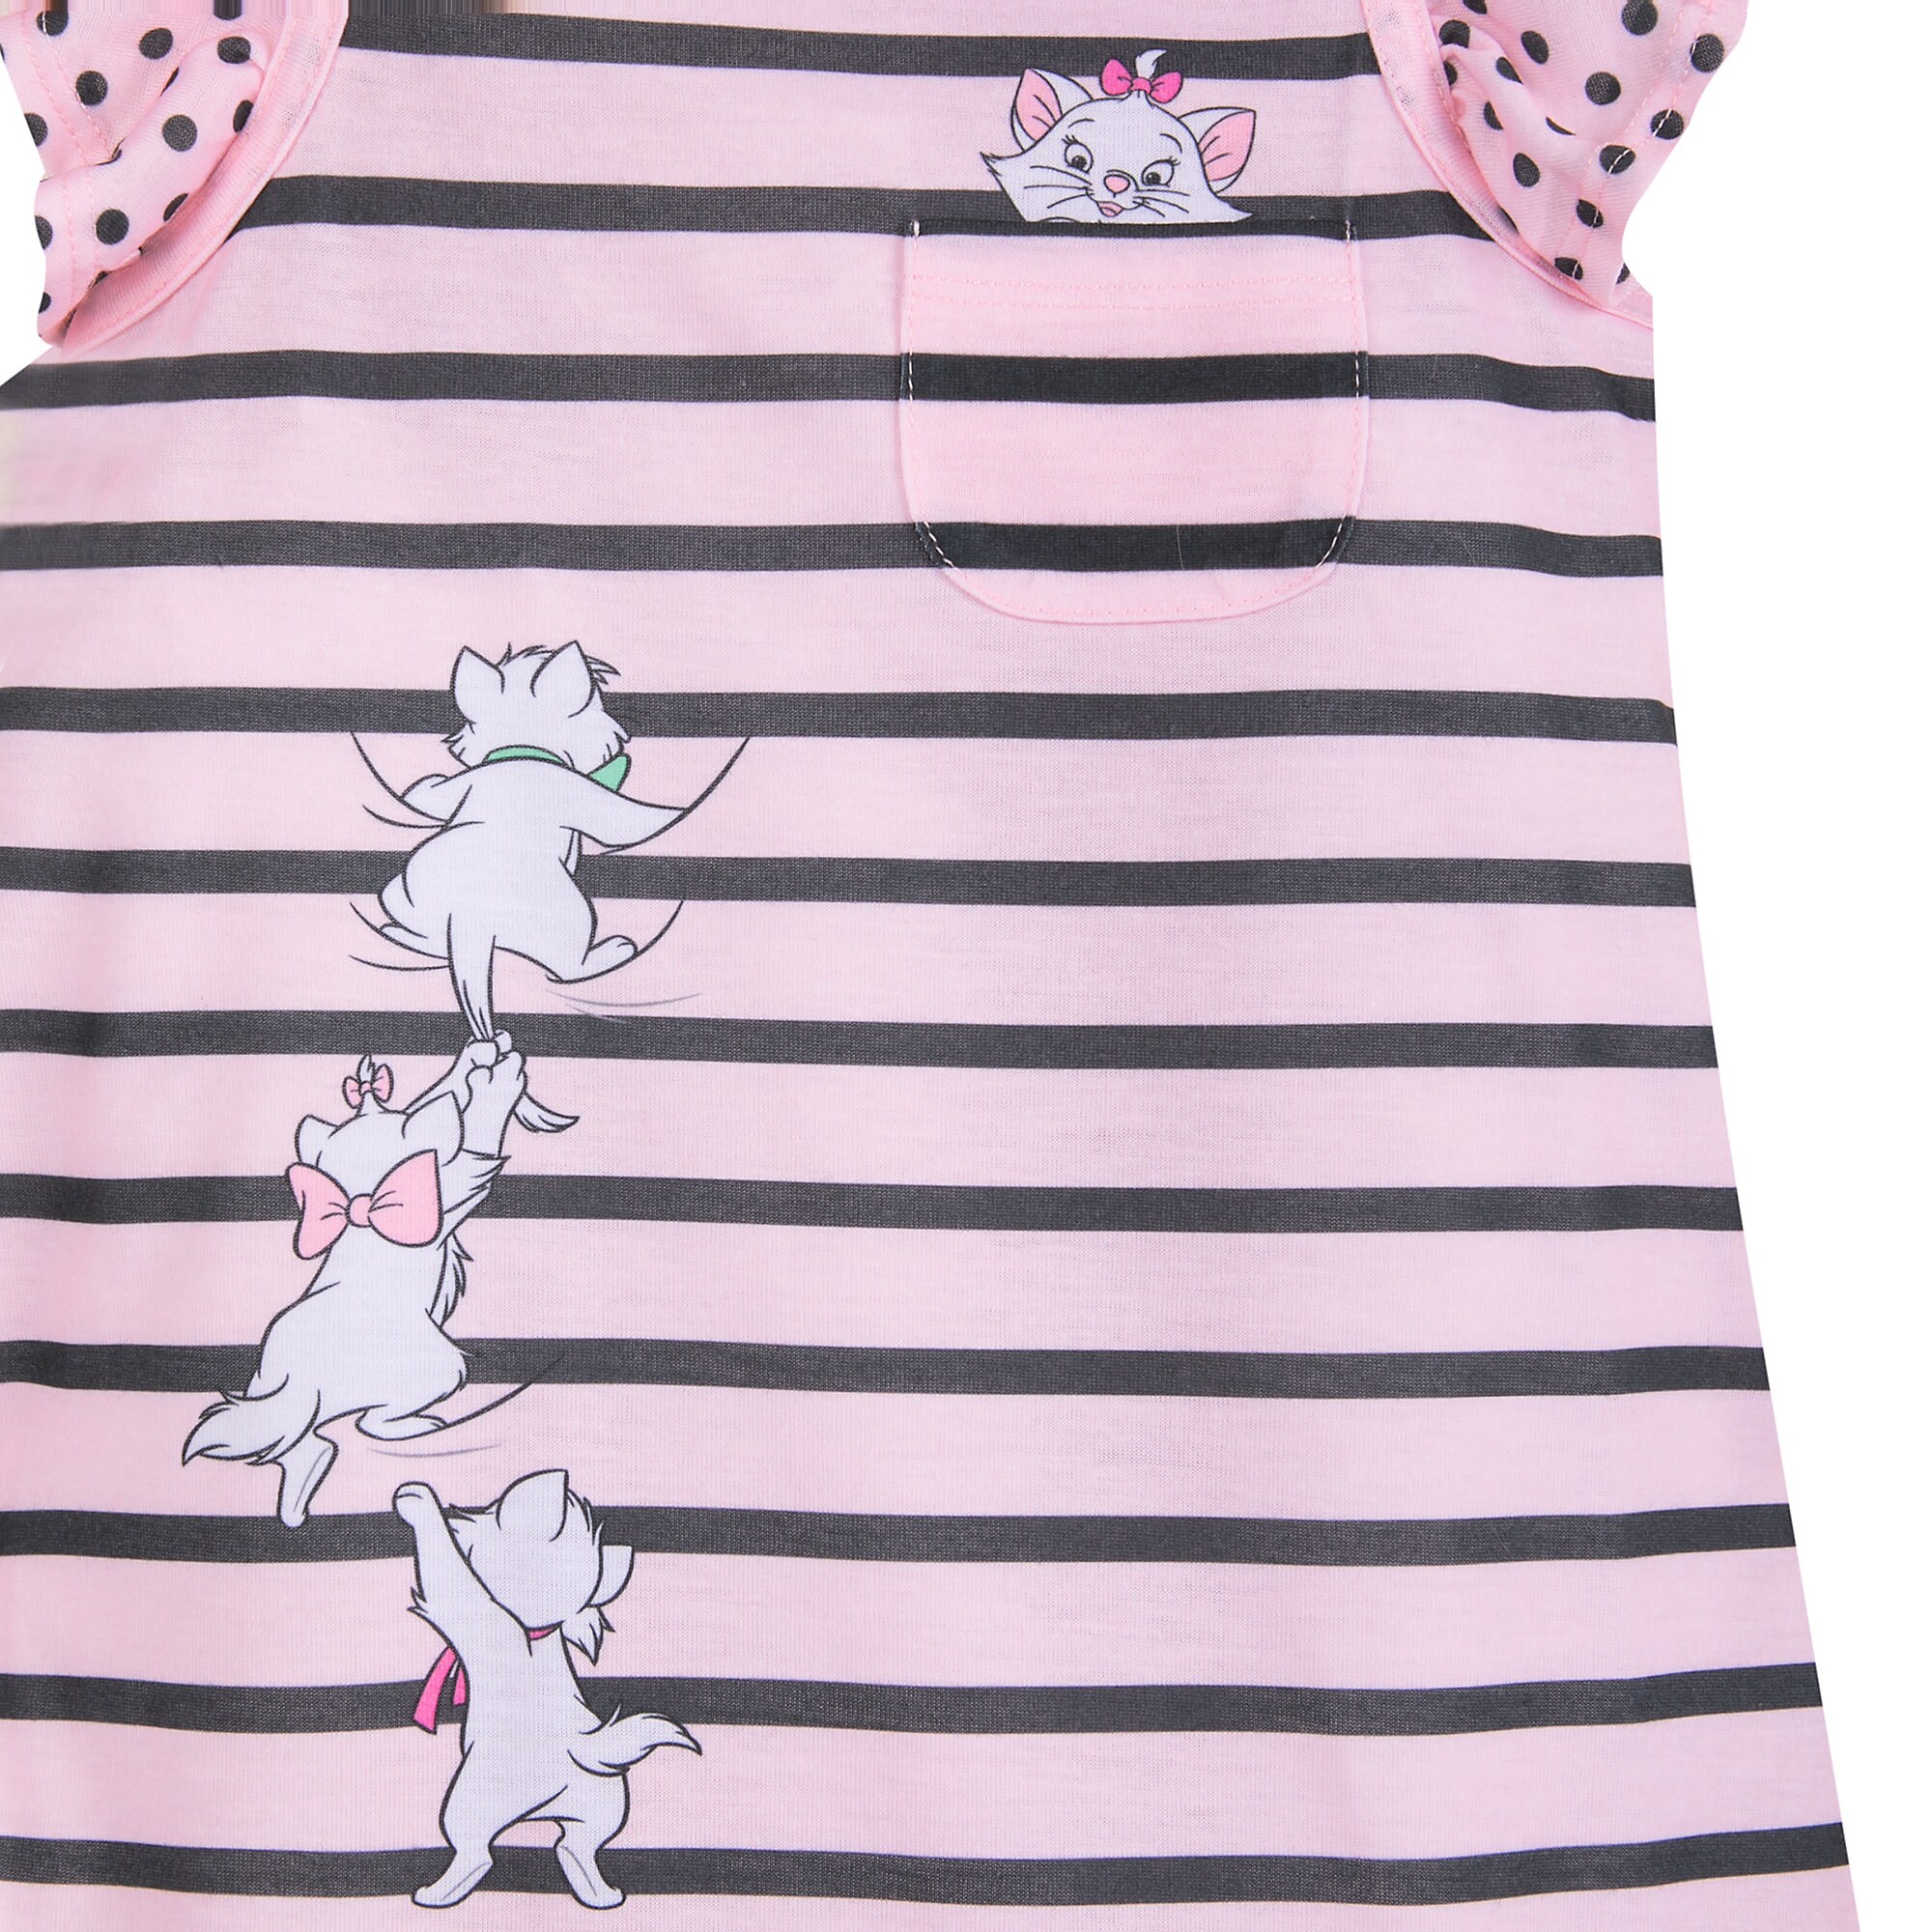 Marie Nightshirt for Girls - The Aristocats